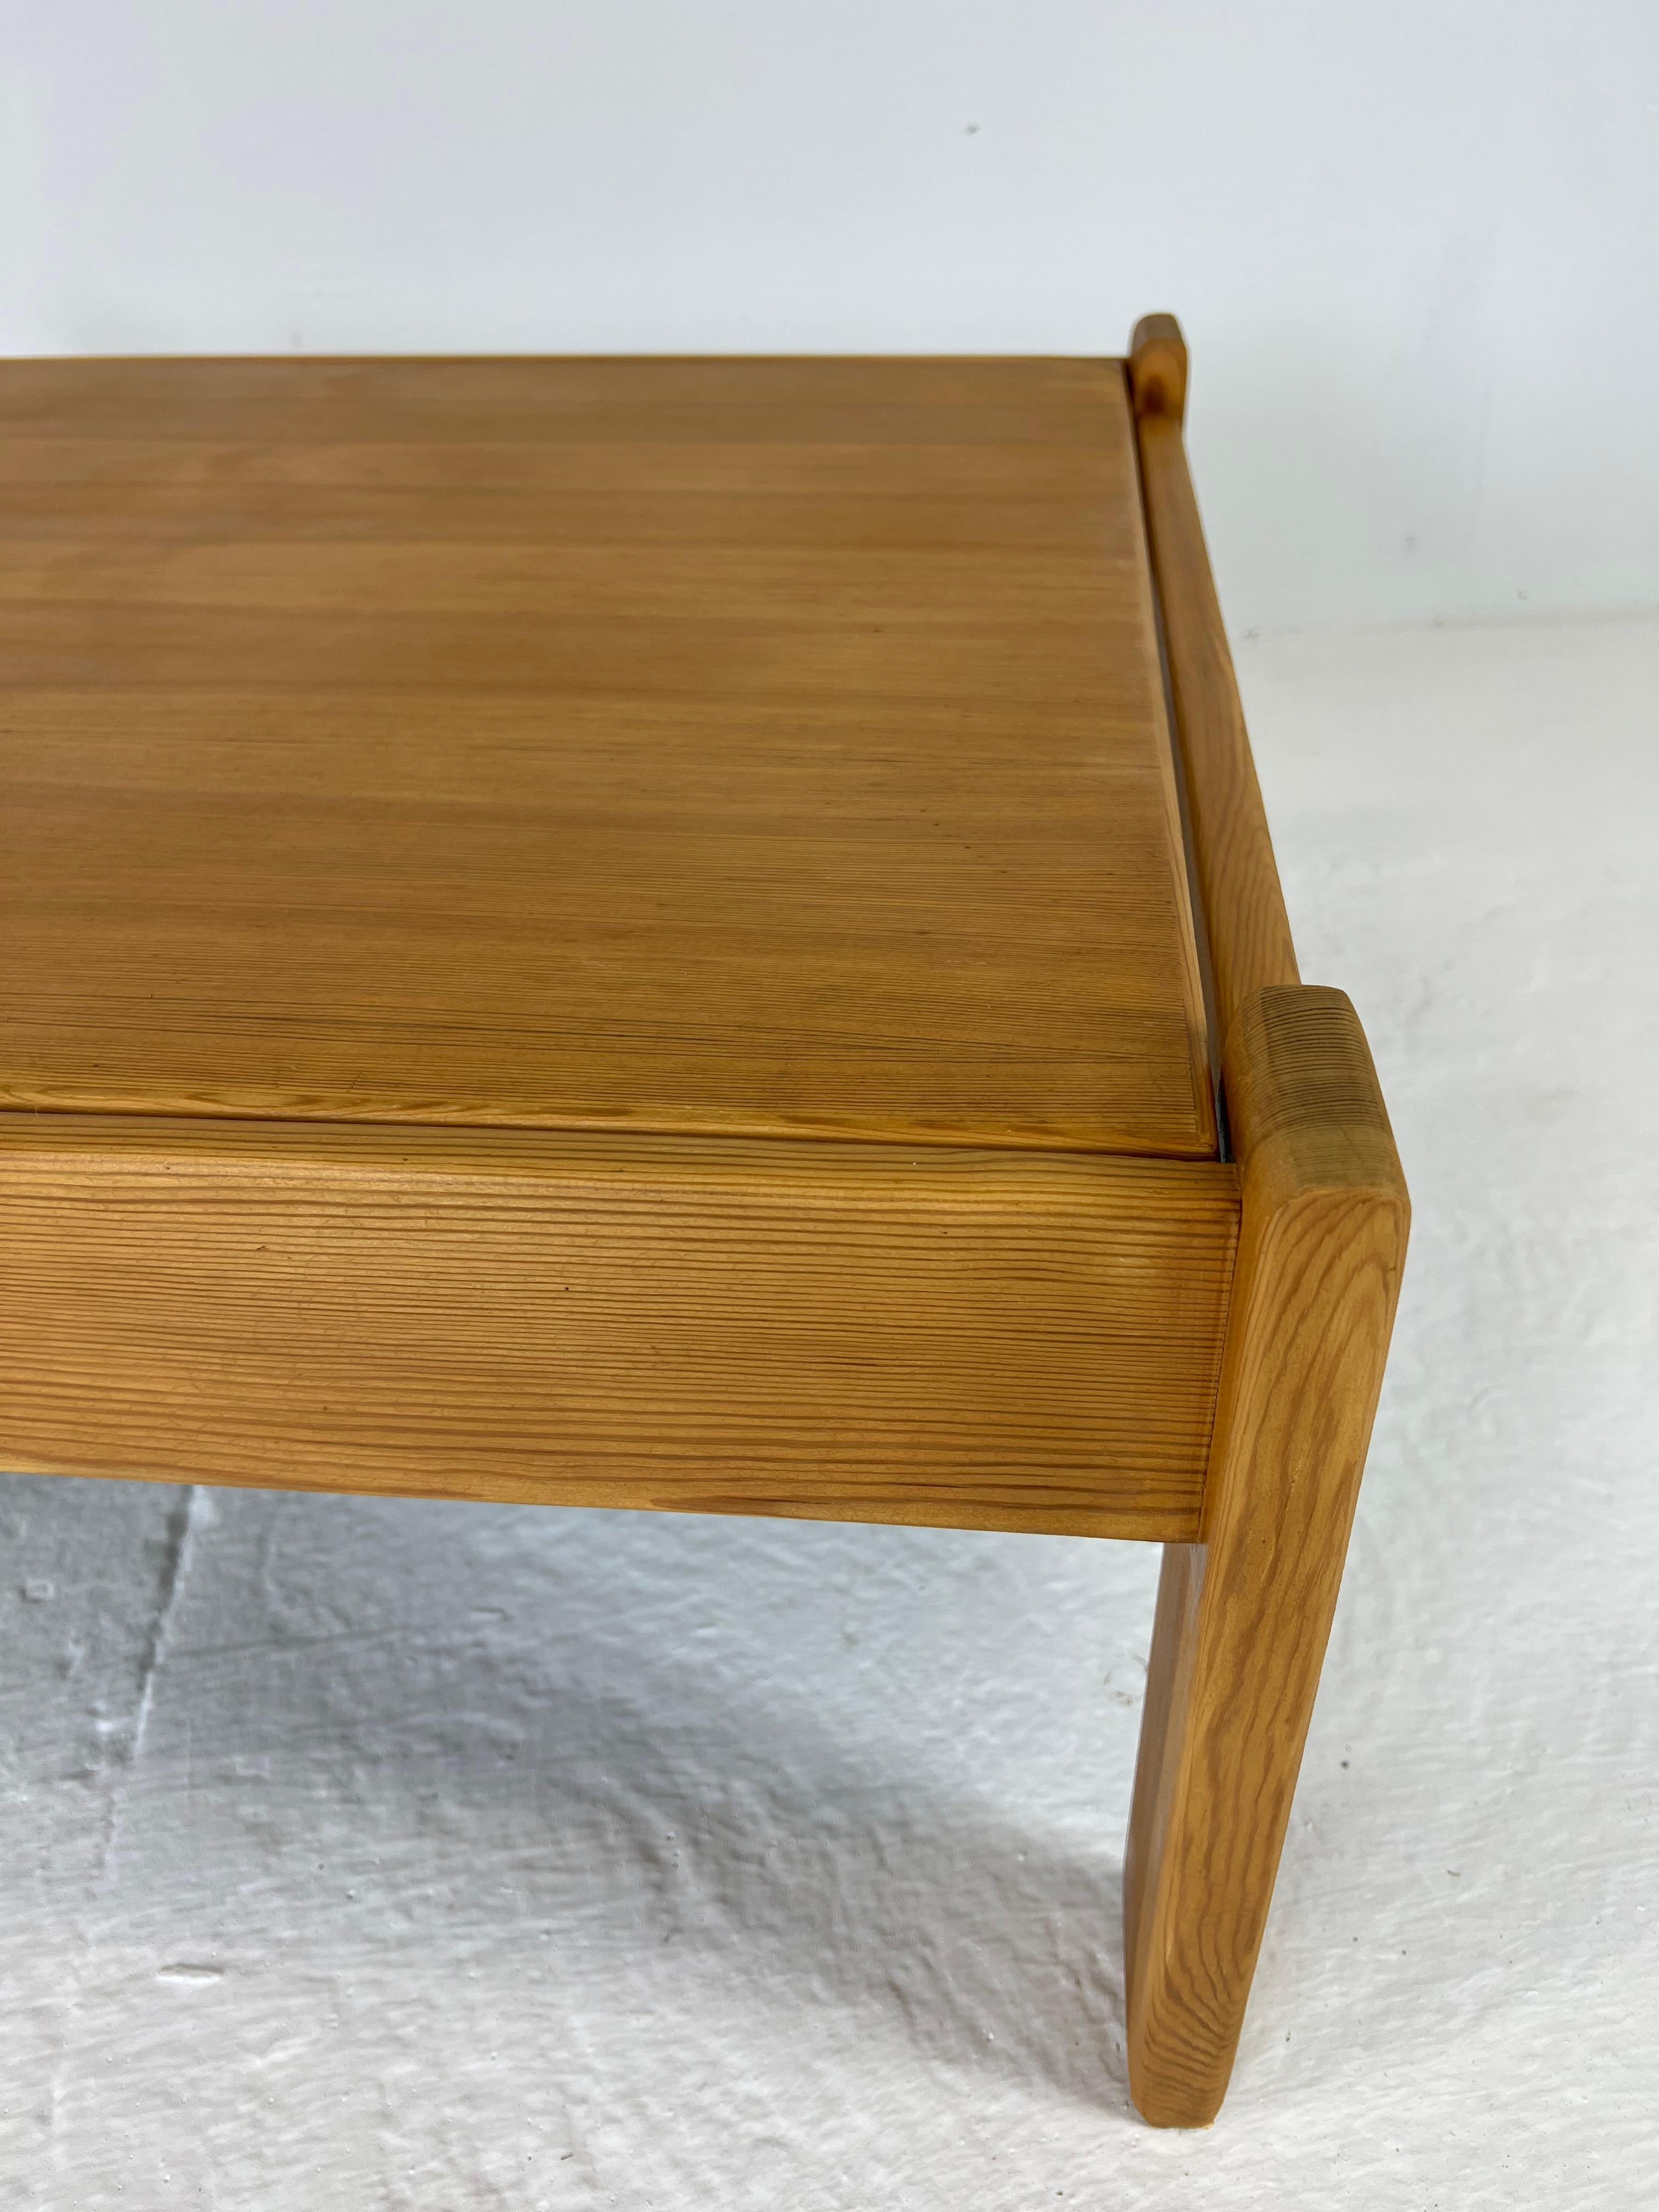 Two-Sided Modernist Coffee Table in Pine Wood, 1970s For Sale 12